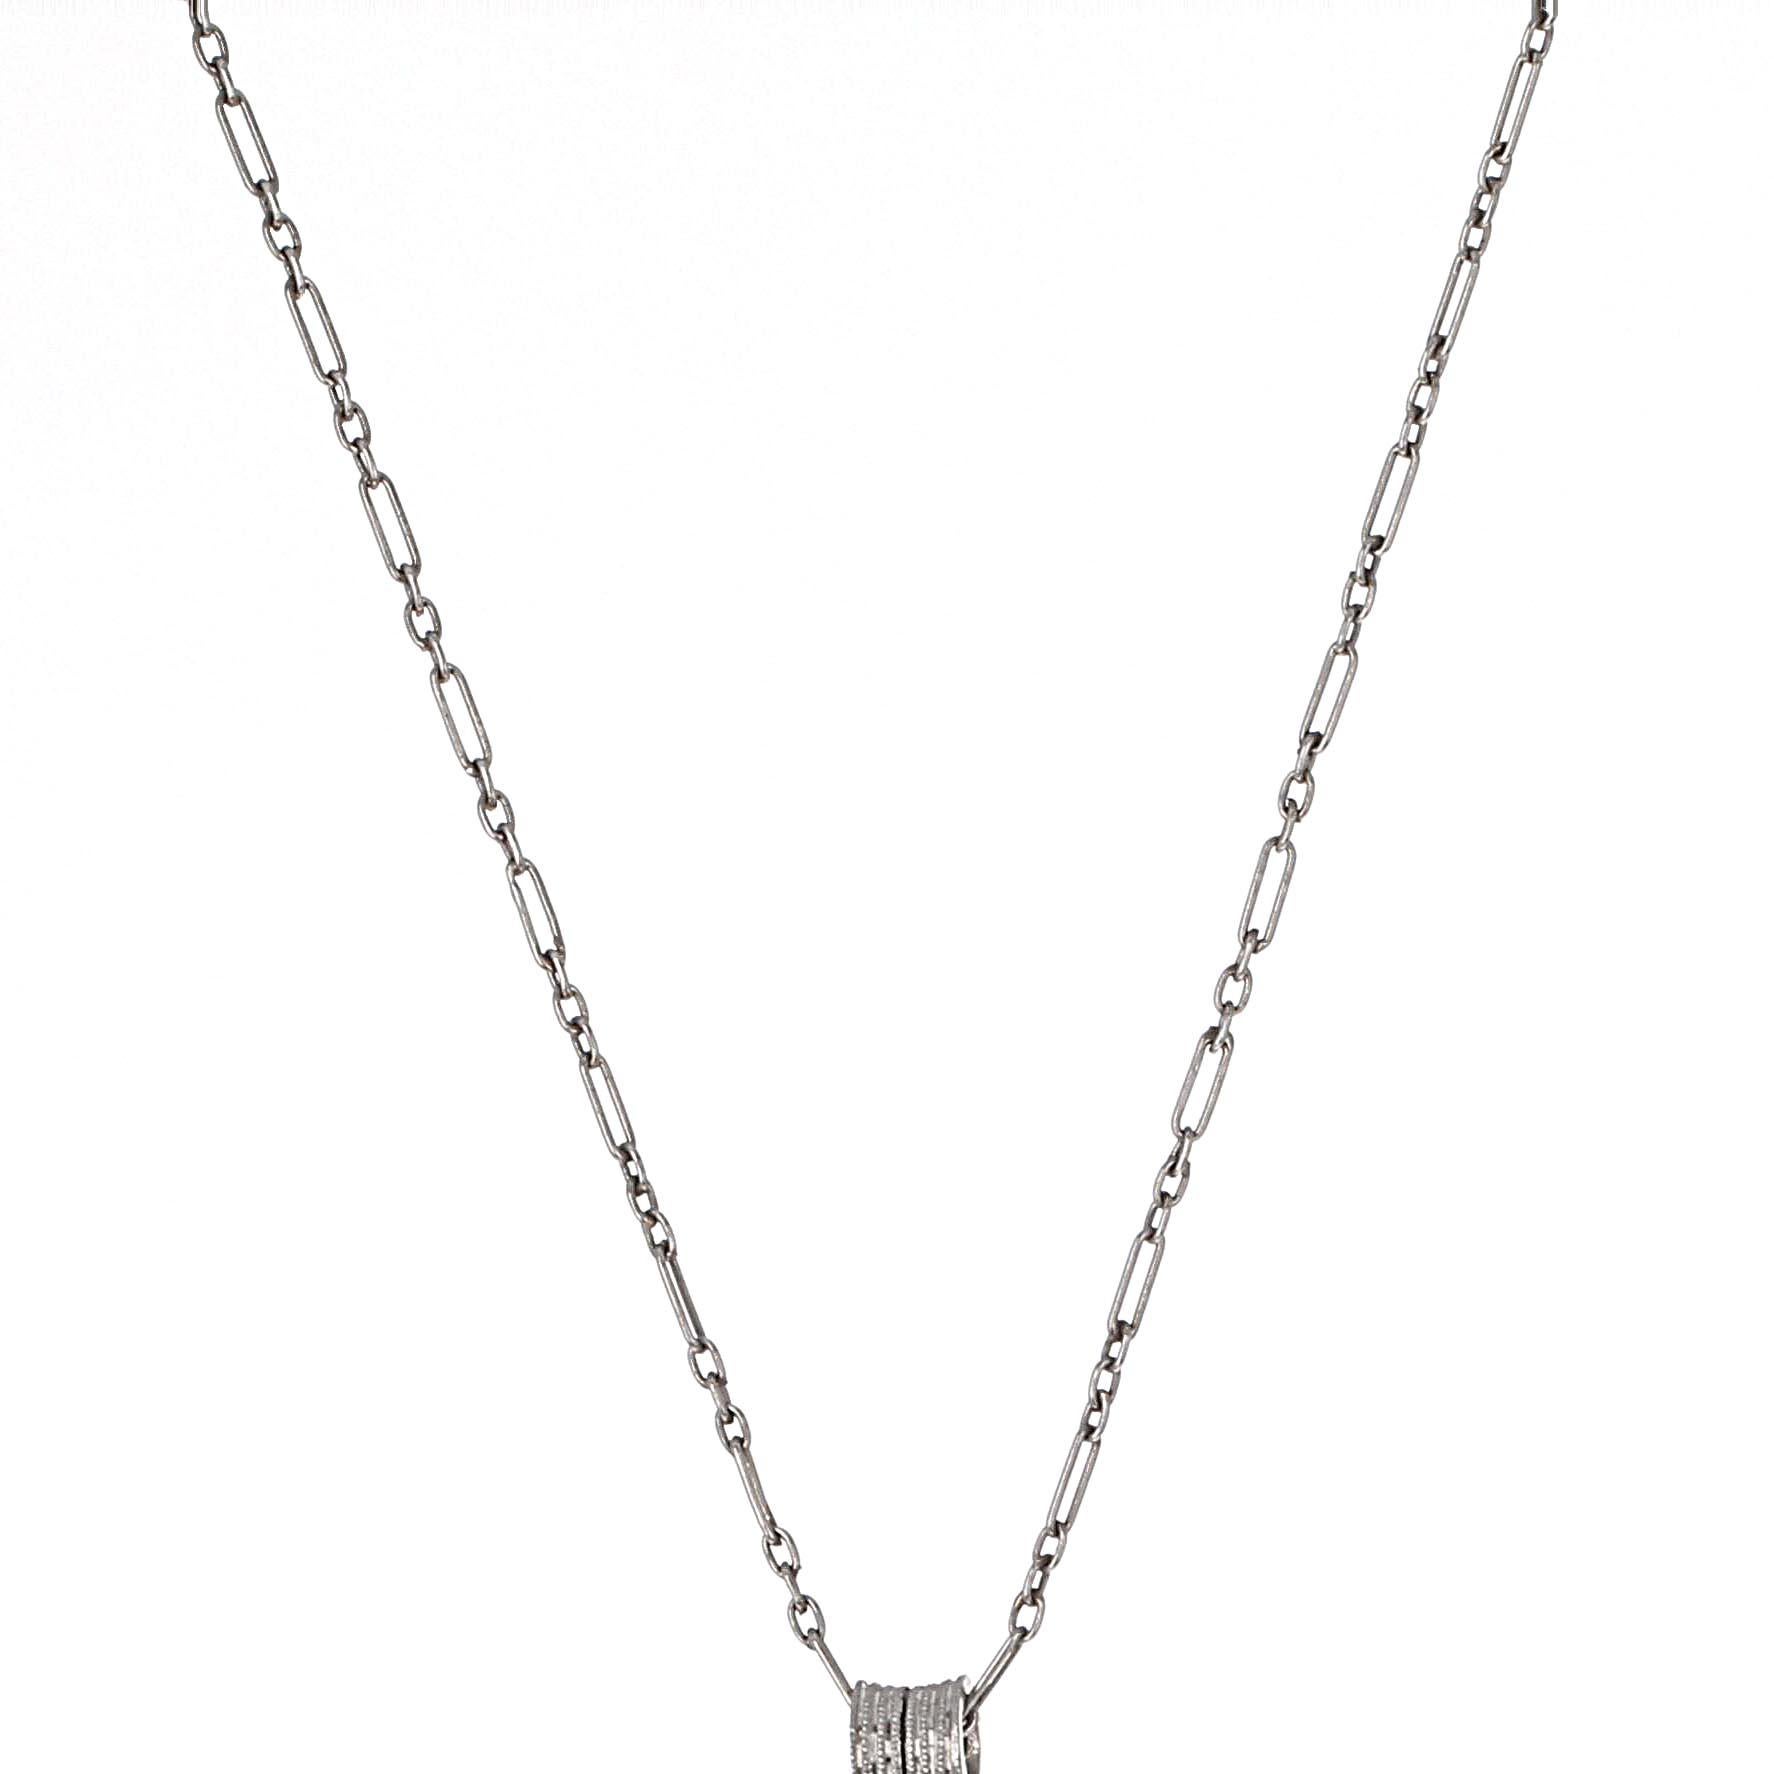 Antique Art Deco 3.96 Carat GIA Certified Diamond Drop Pendant Necklace In Excellent Condition For Sale In Beverly Hills, CA